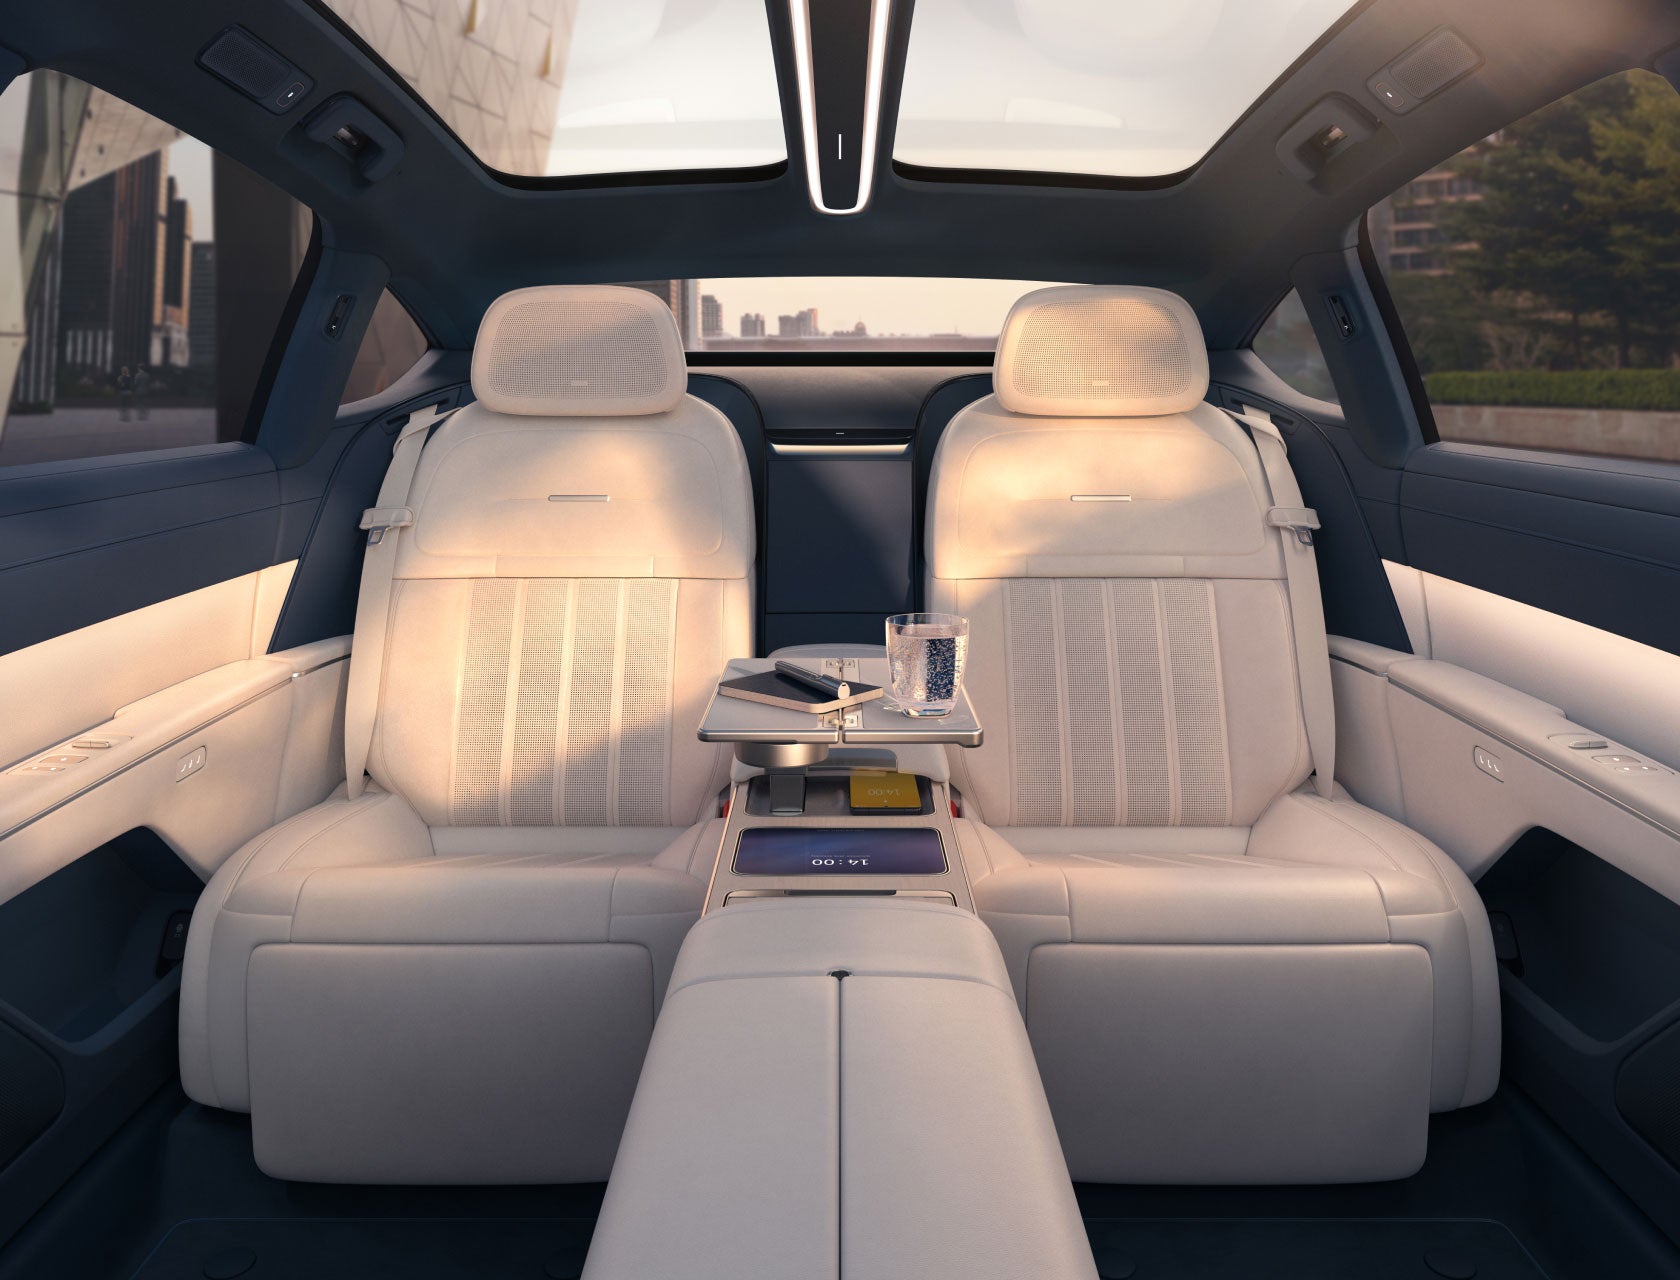 The original four-seat layout creates four independent executive spaces, each of which has its dedicated view and experience. Enjoy an executive suite of your own.